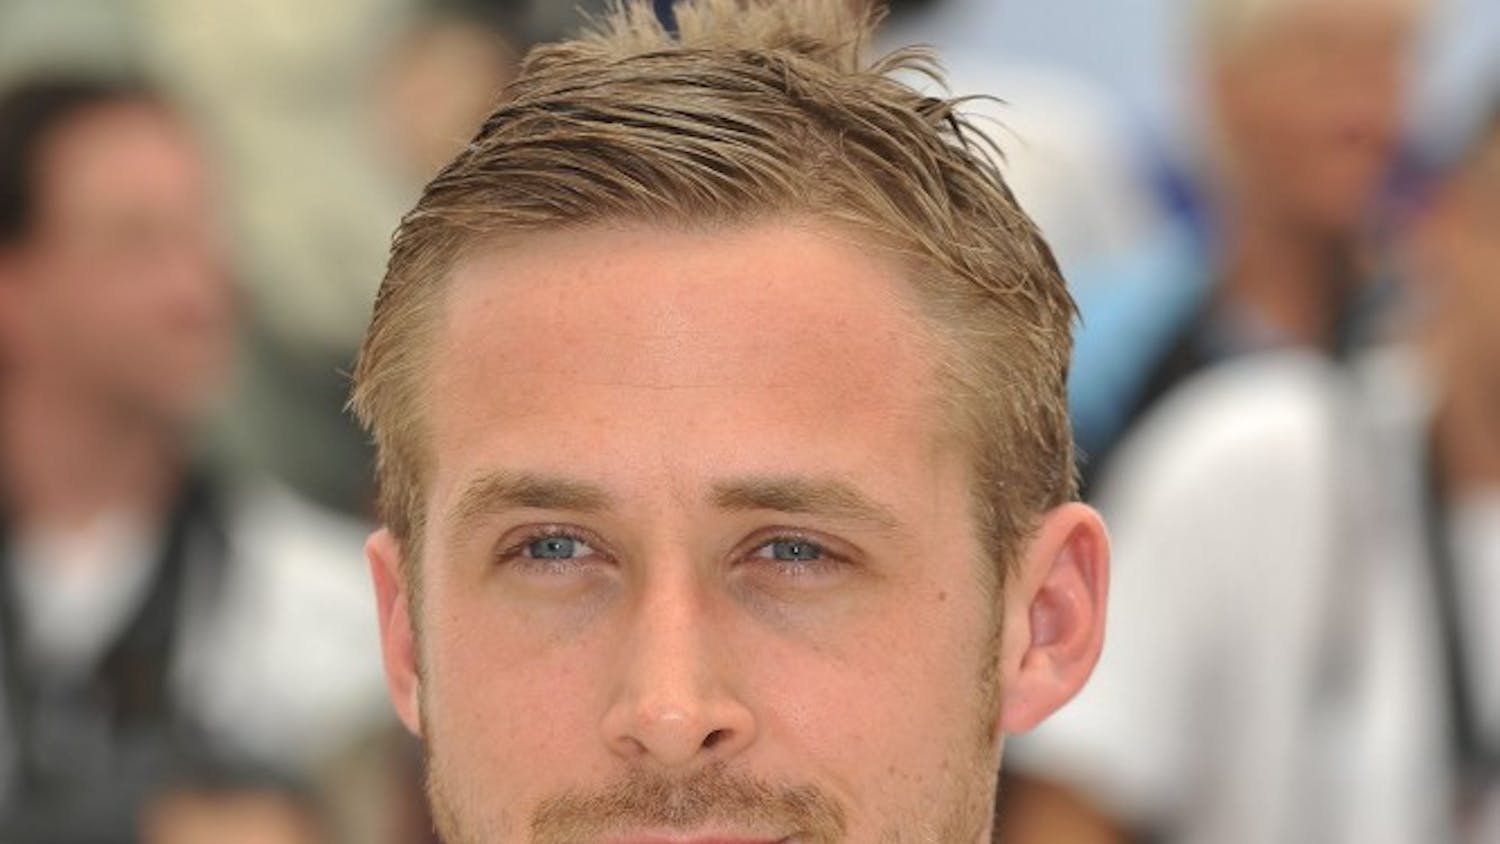 Ryan Gosling attending the "Blue Valentine" photocall during the 63rd Cannes Film Festival in Cannes, France on May 18, 2010. (Hahn-Nebinger-Orban/ABACAPRESS.COM/MCT)